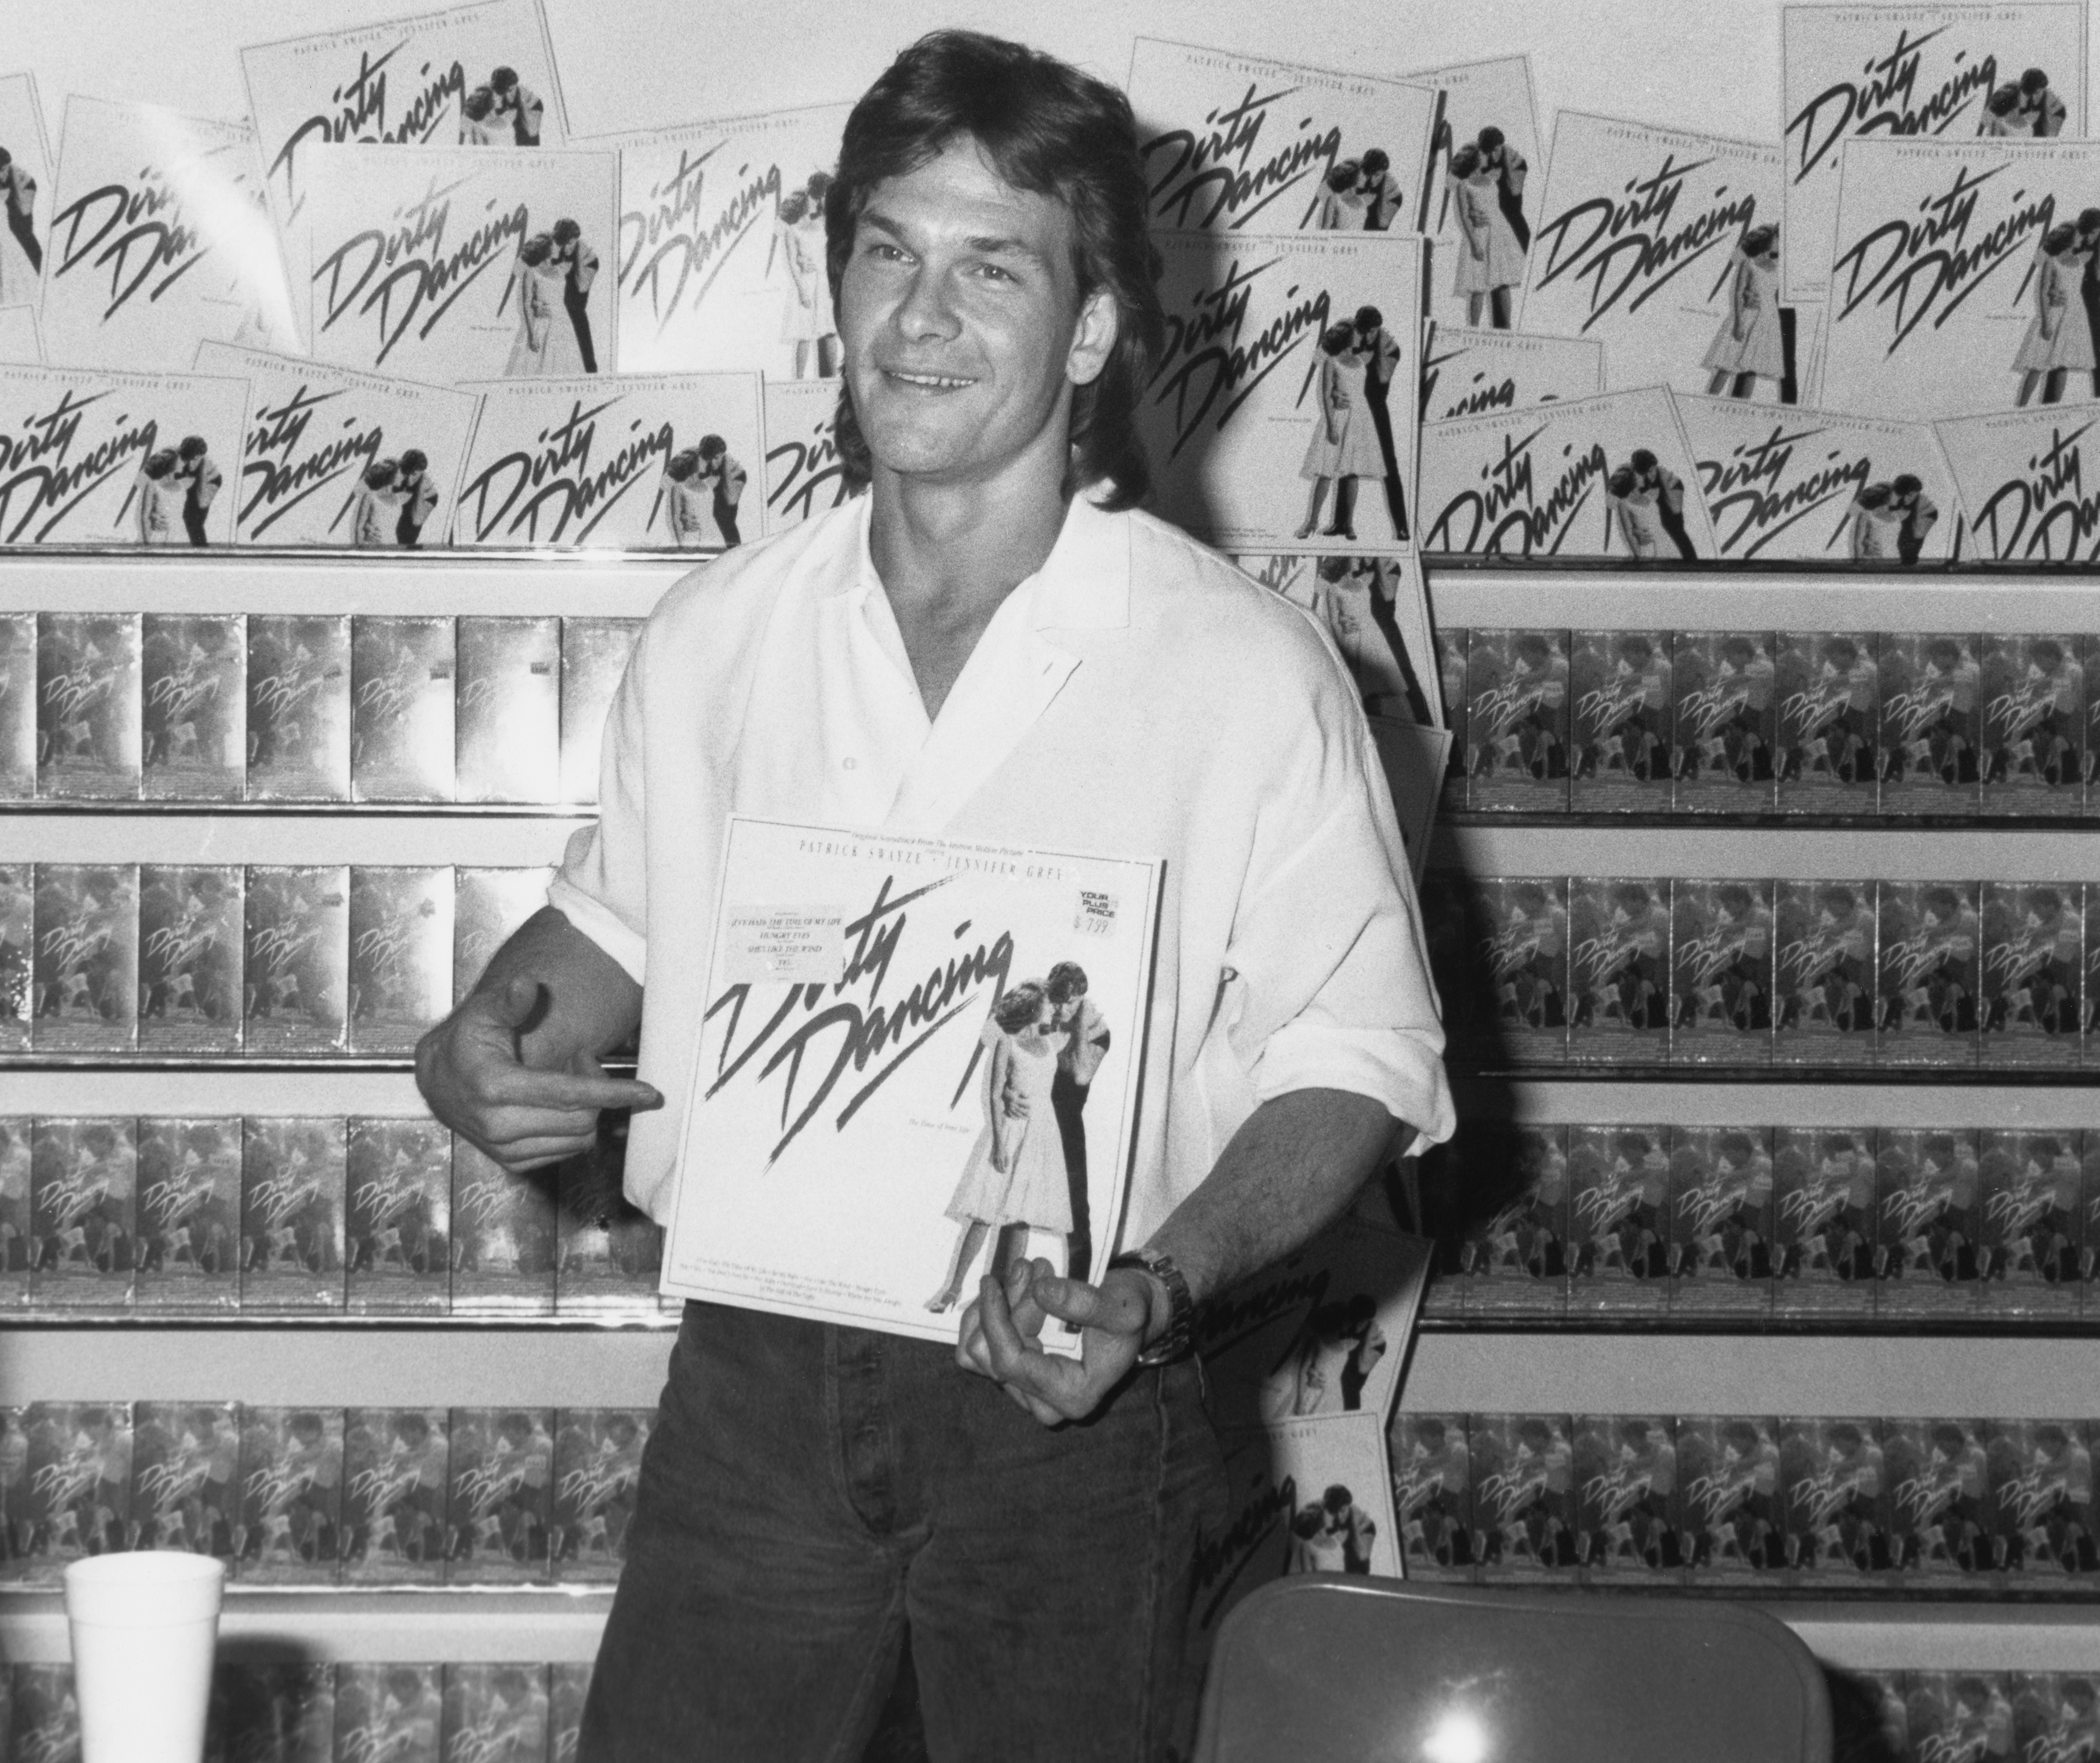 Patrick Swayze at the  attends an in-store promotional event where he signed copies of the soundtrack to 'Dirty Dancing', at a record store in Los Angeles, California, 1988 | Source: Getty Images